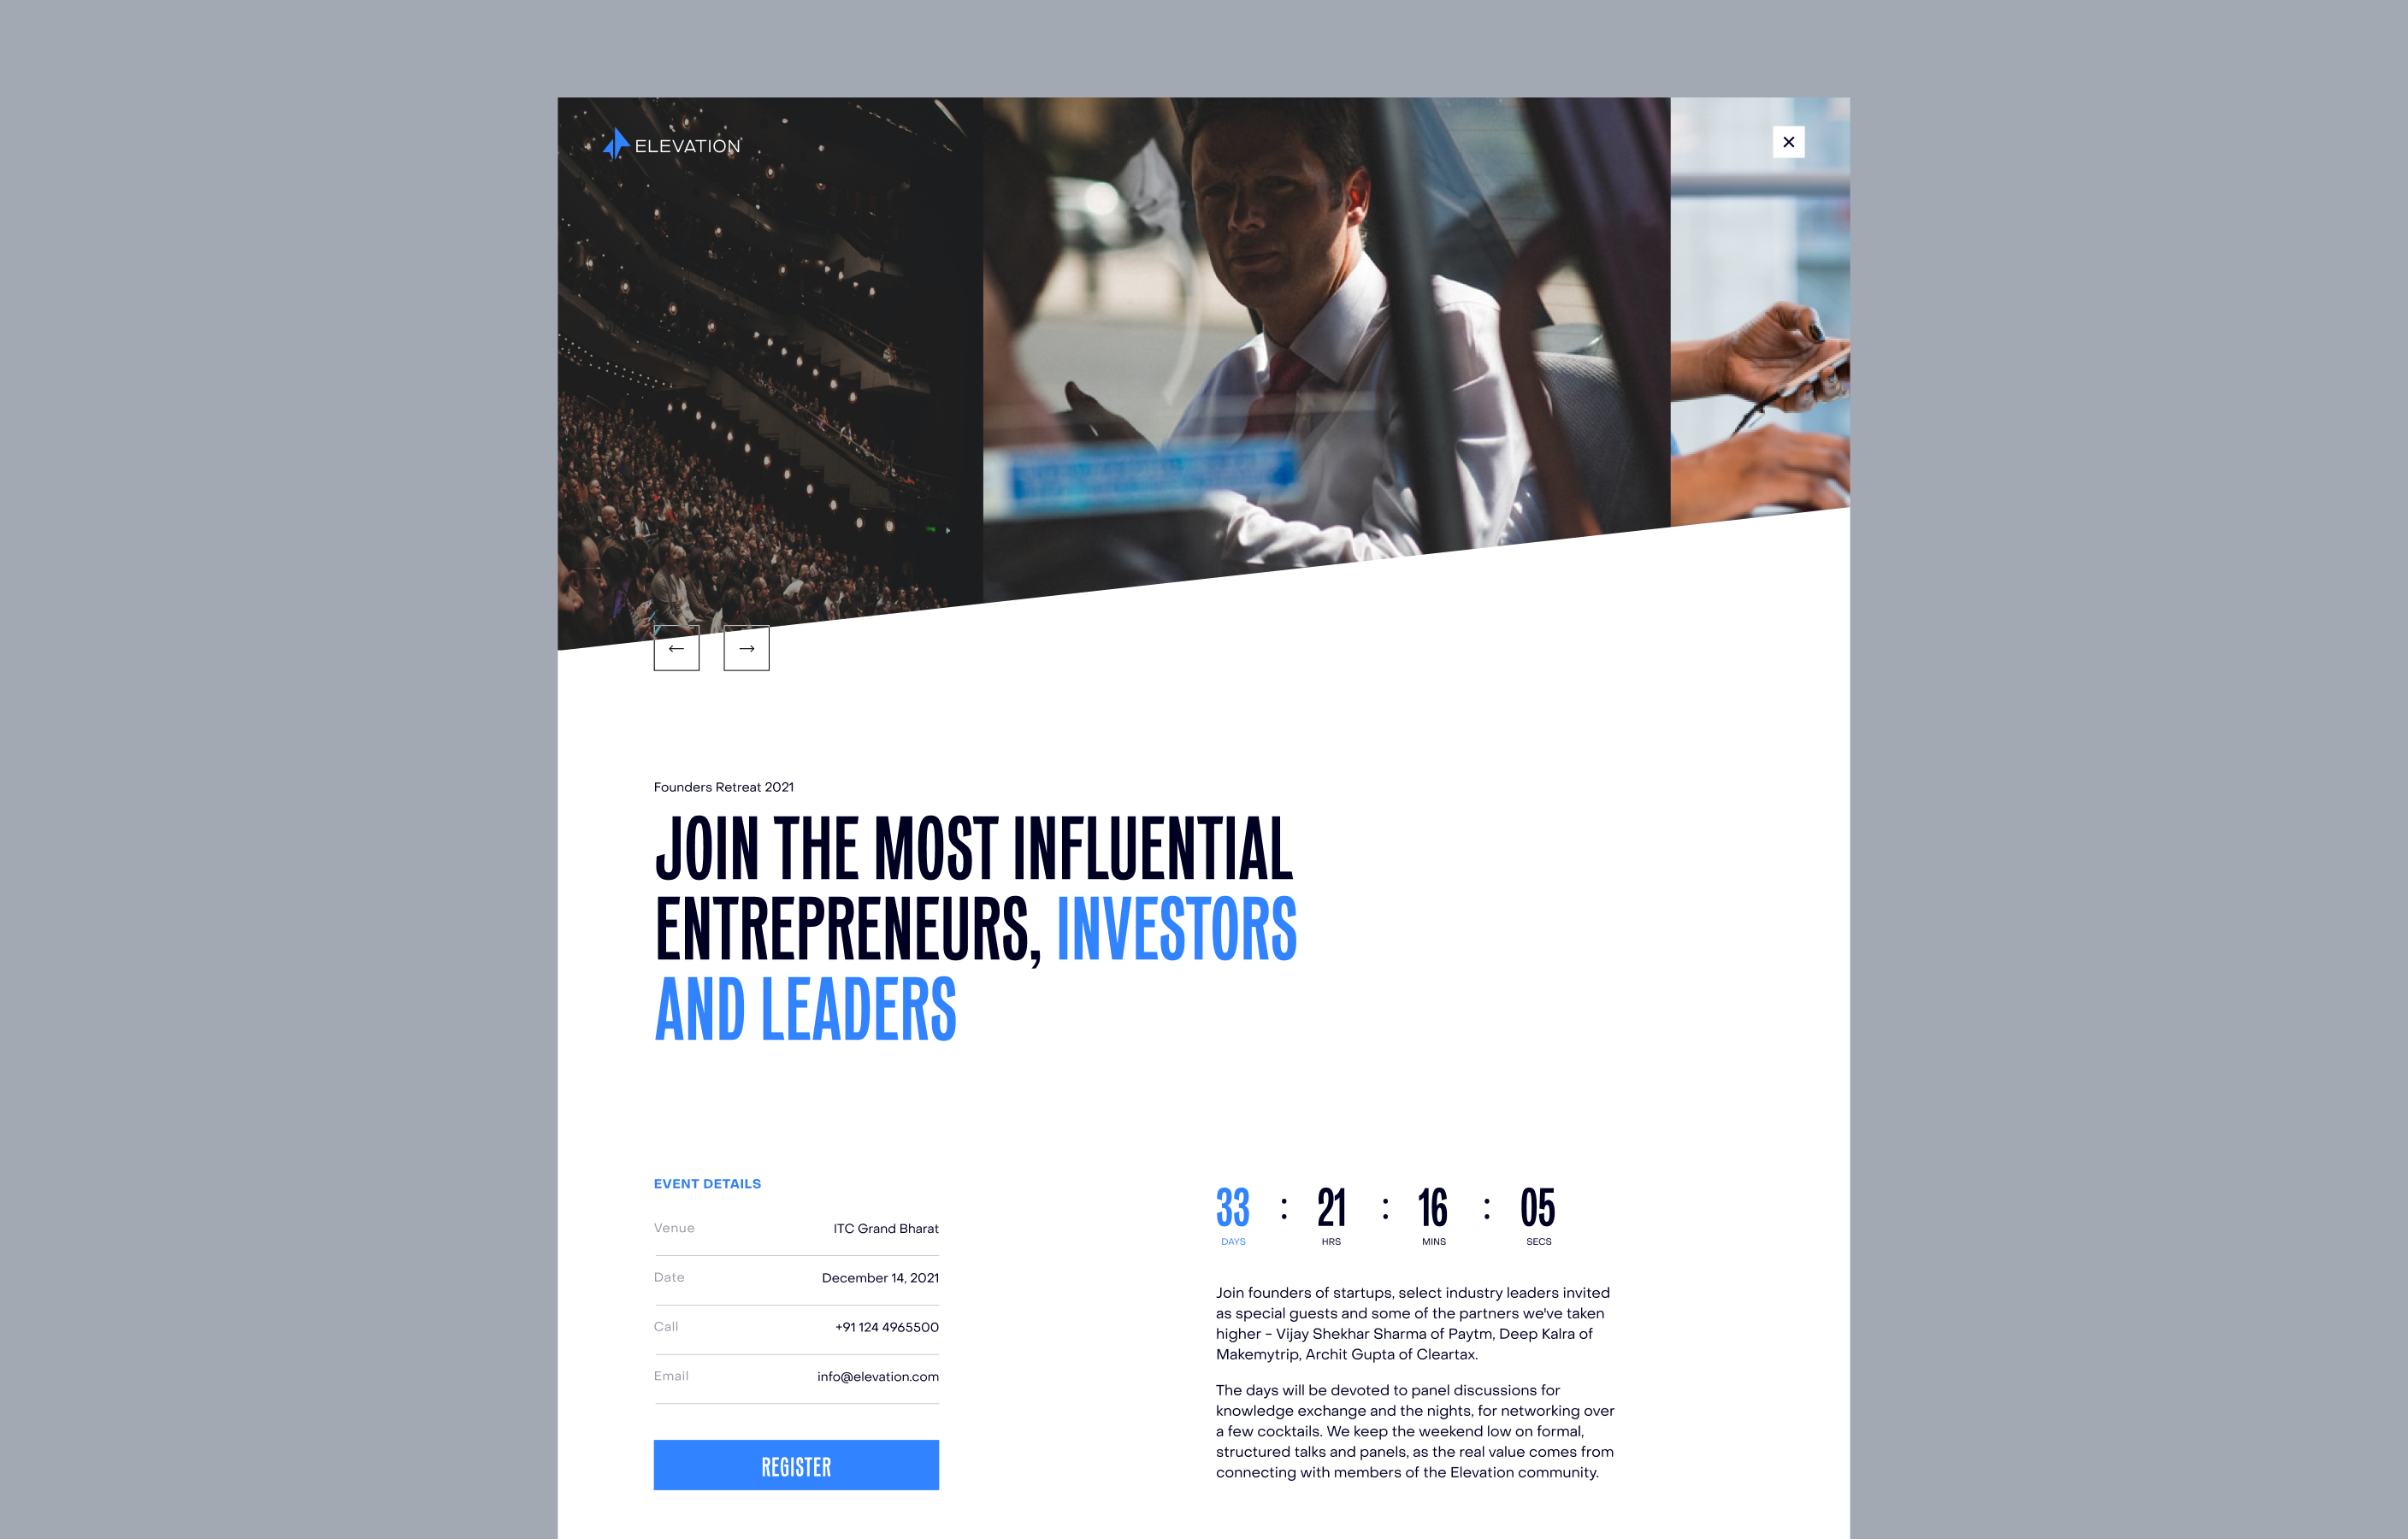 Desktop event page of the new Elevation Capital website